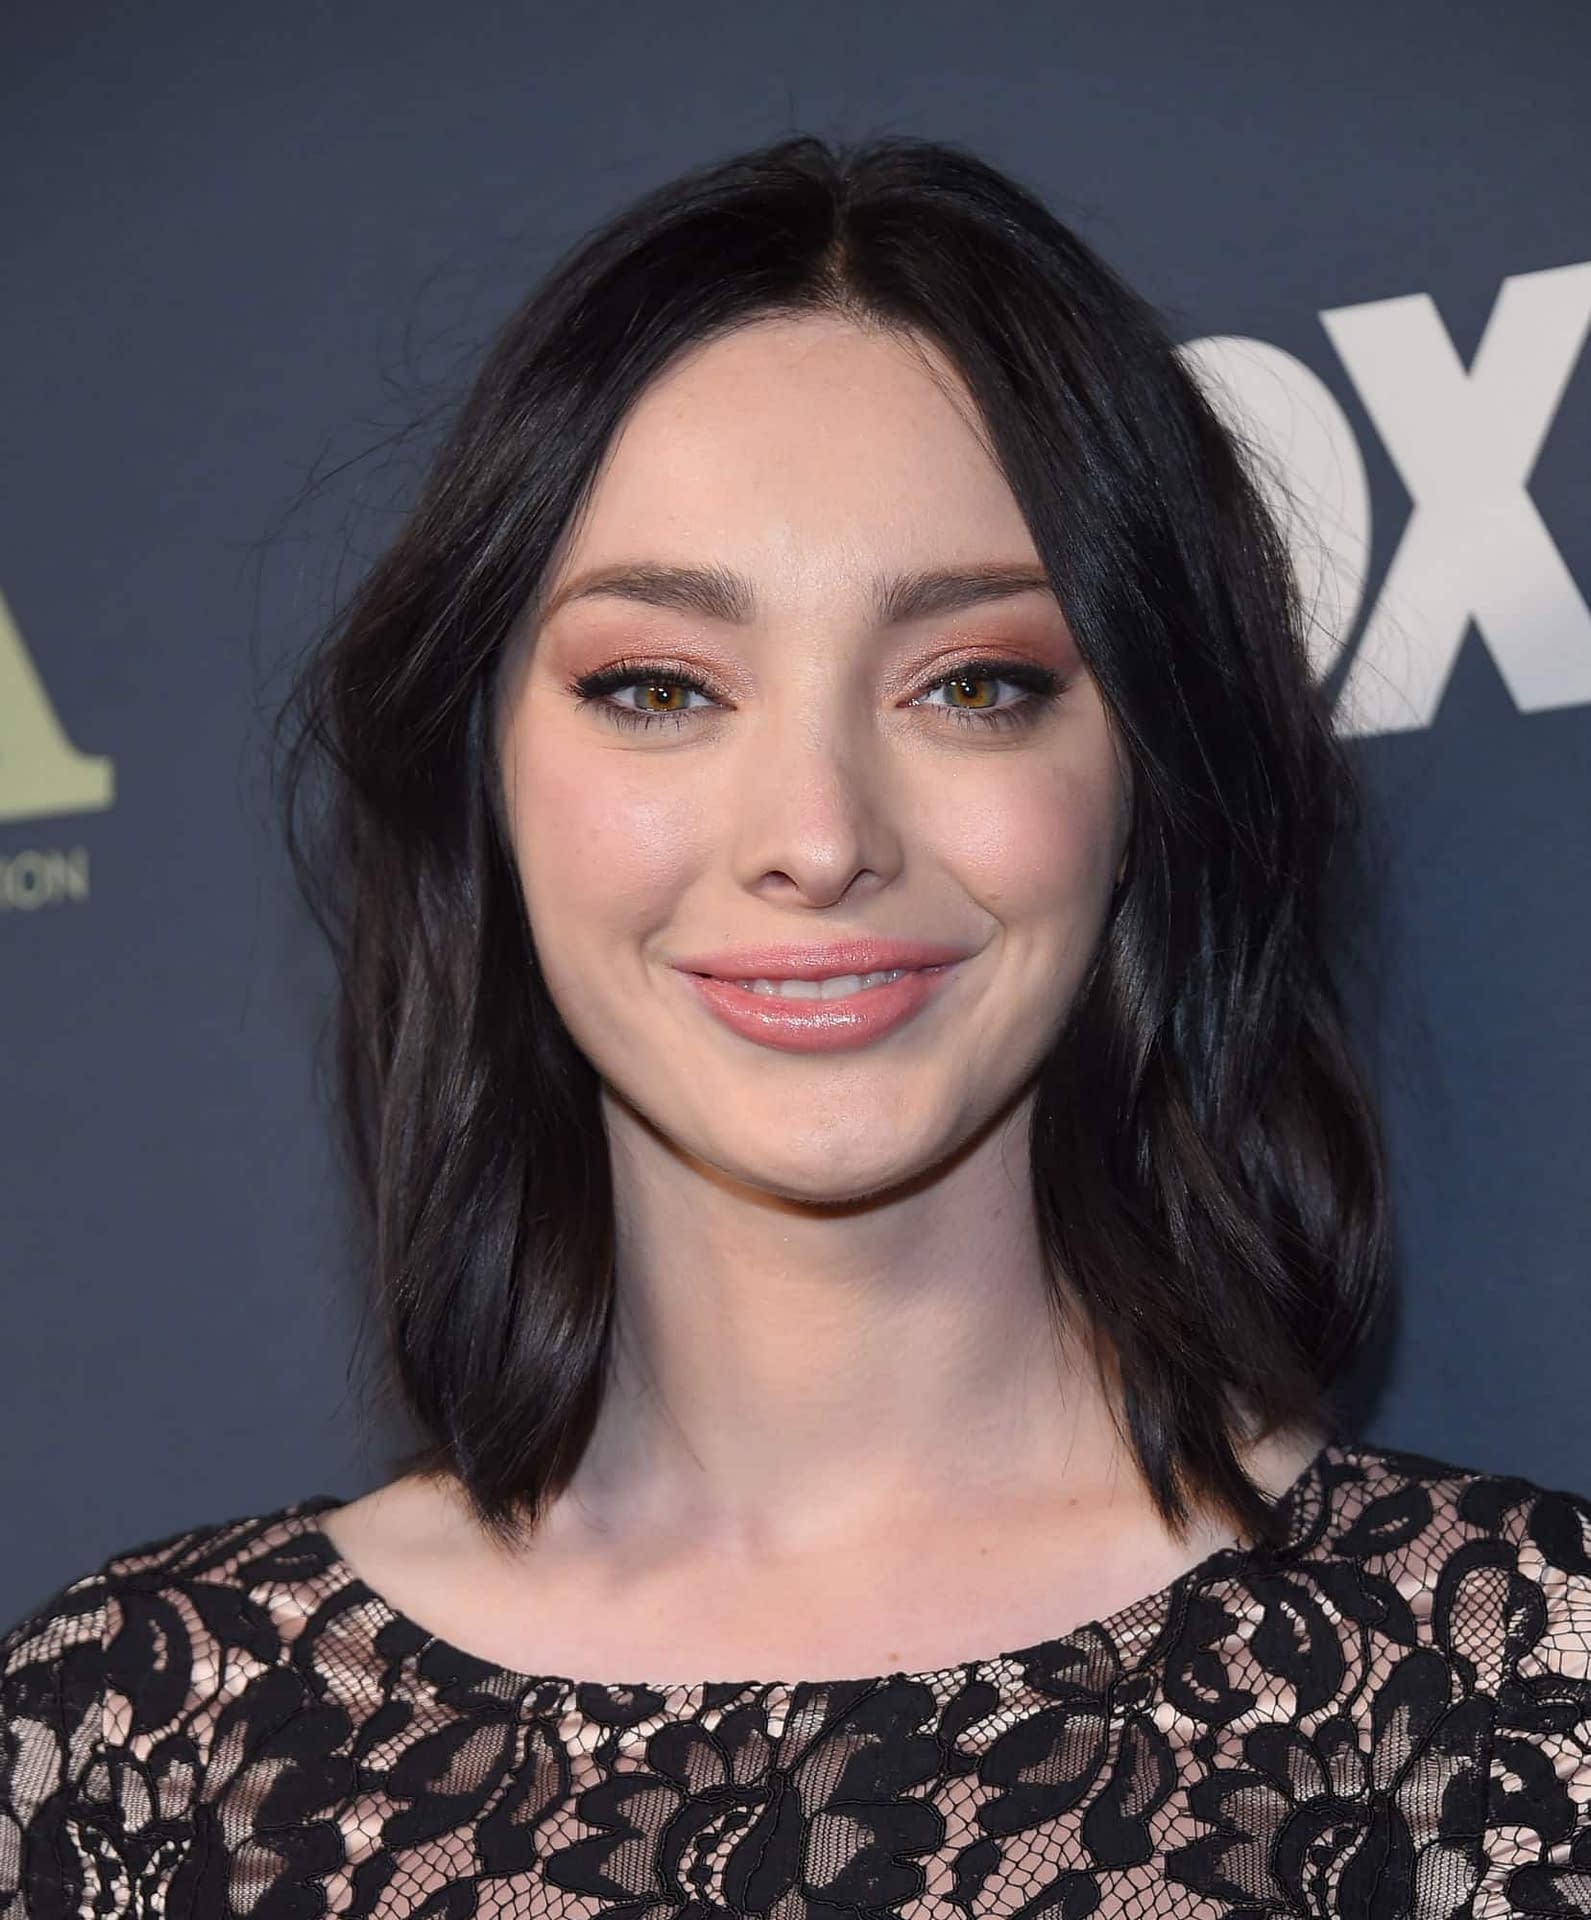 The Gifted Star Emma Dumont Talks Taking On a Very Different Superhero in Razor